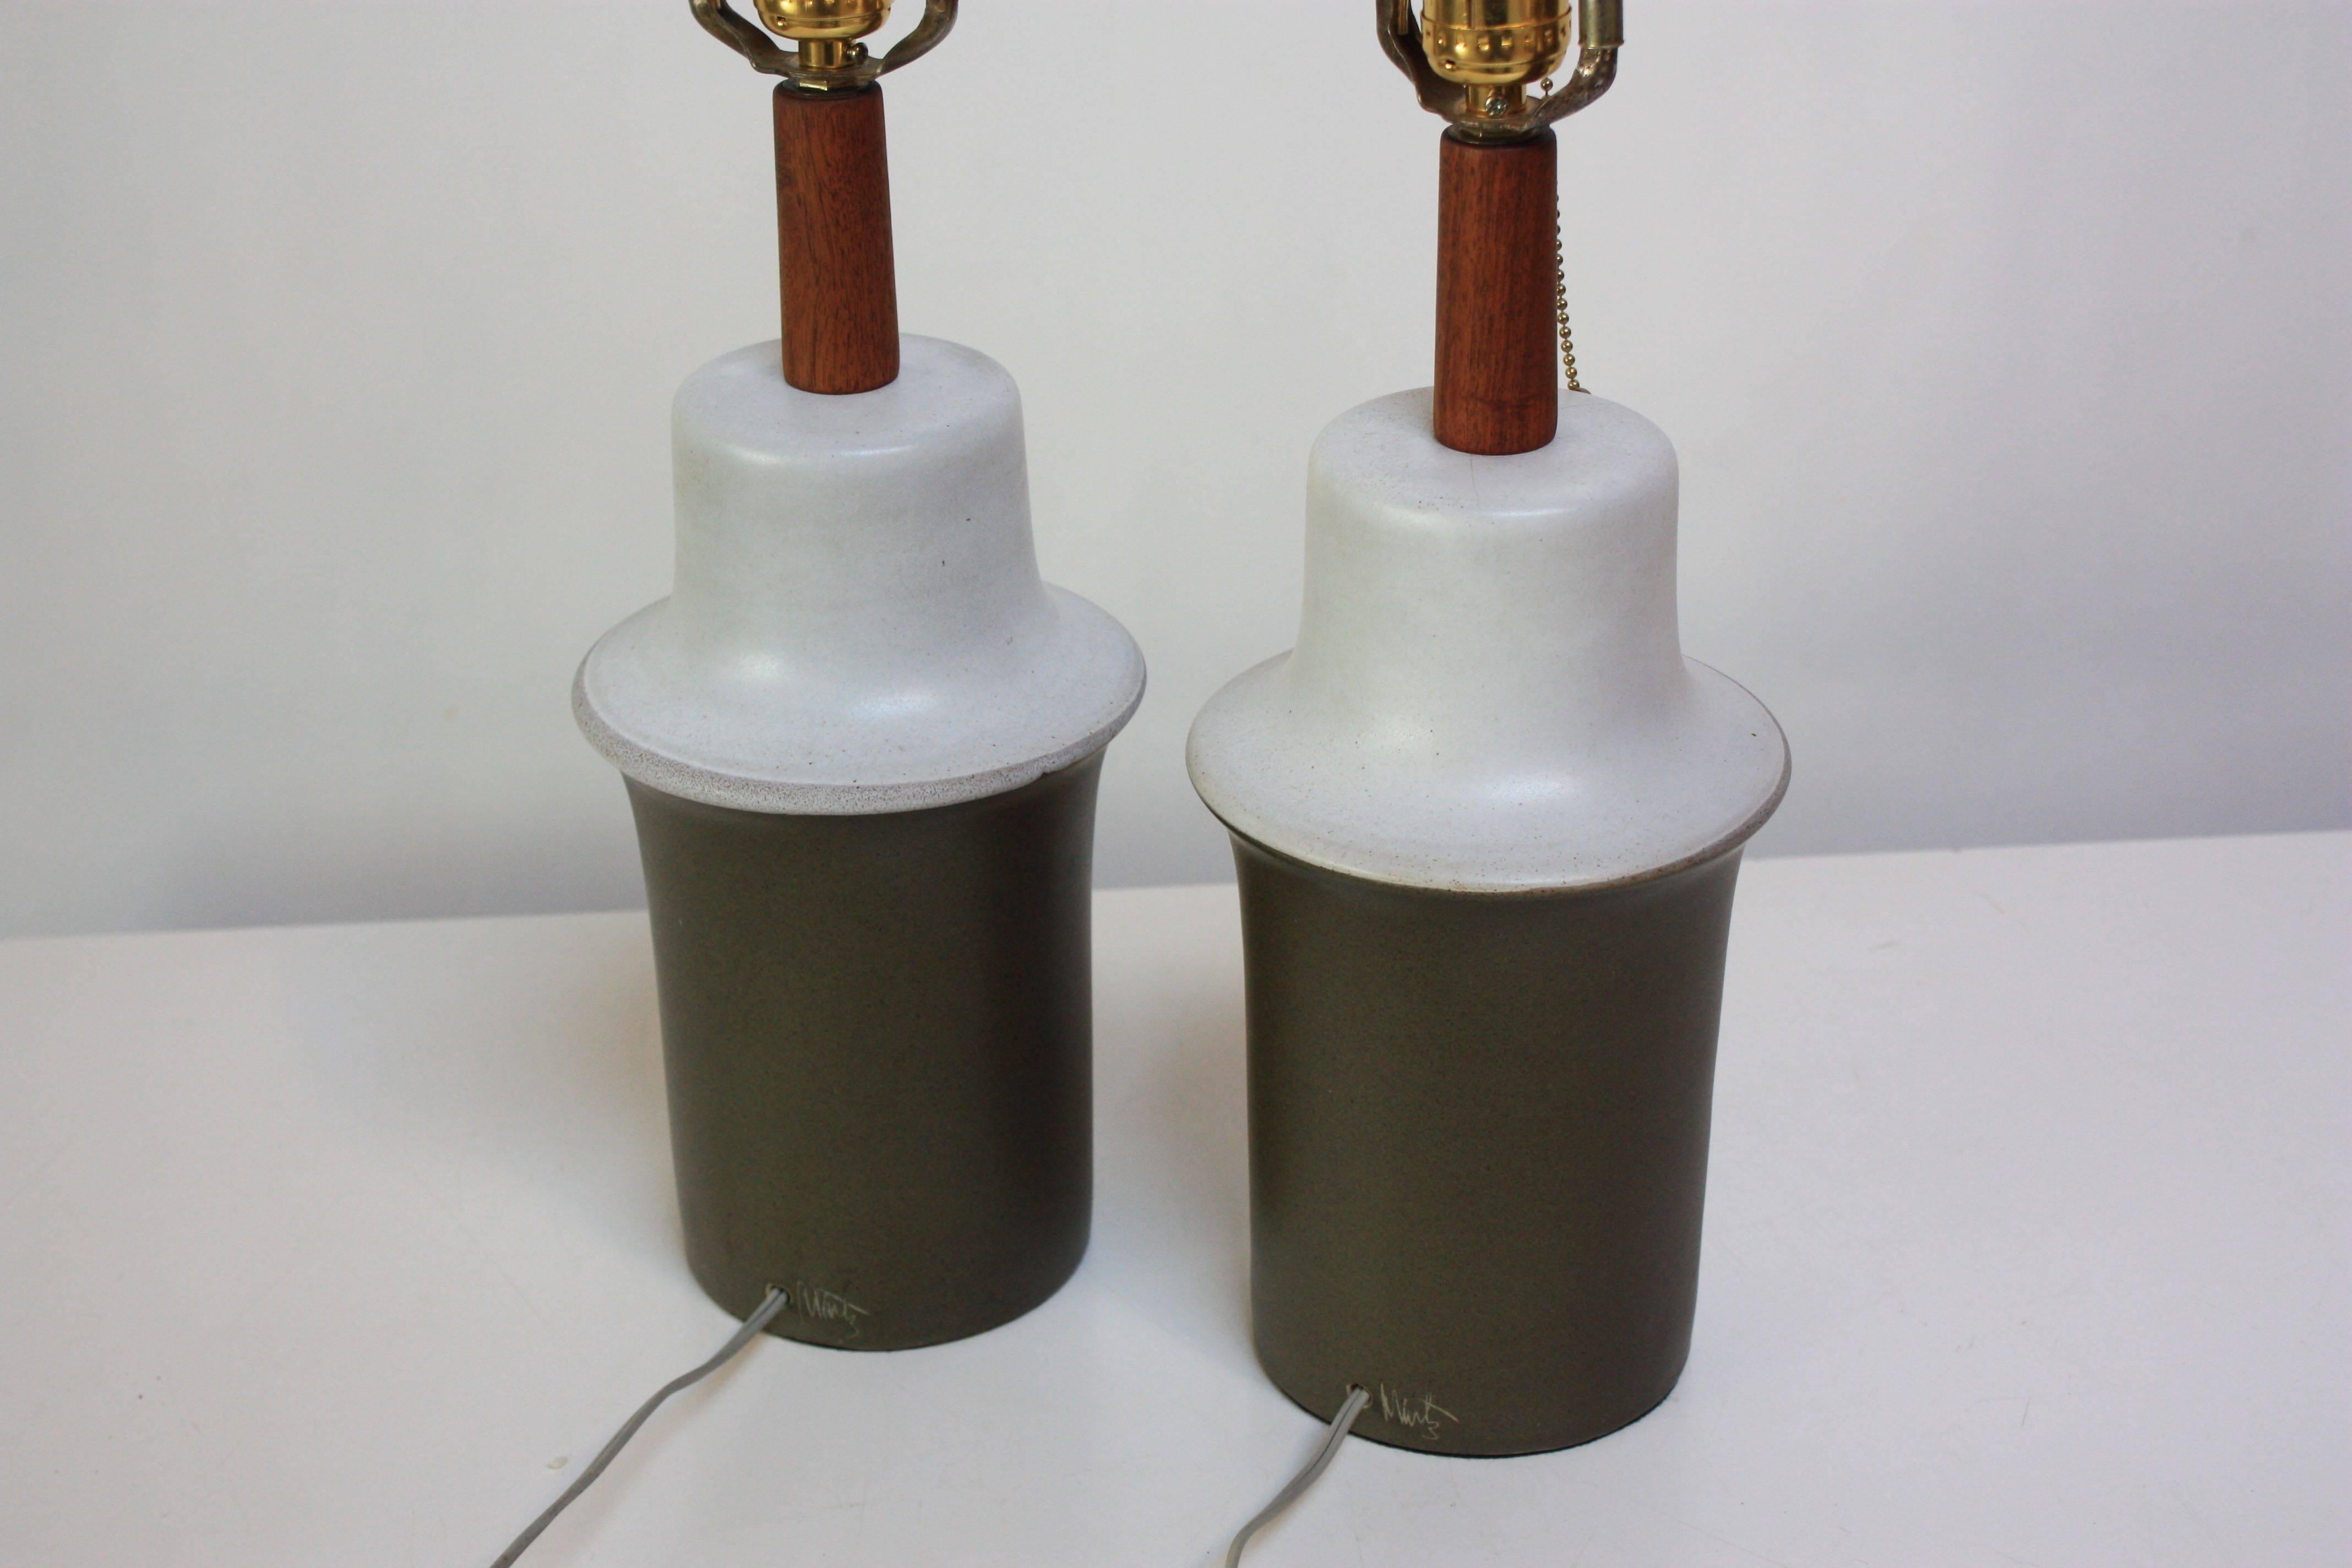 These ceramic lamps were designed by Gordon and Jane Martz for Marshall Studio featuring a two-tone matte glaze (olive green and pale grey). Signed 'Martz.' The original walnut finials are in tact. 
There are some cracks/crazing to the ceramic